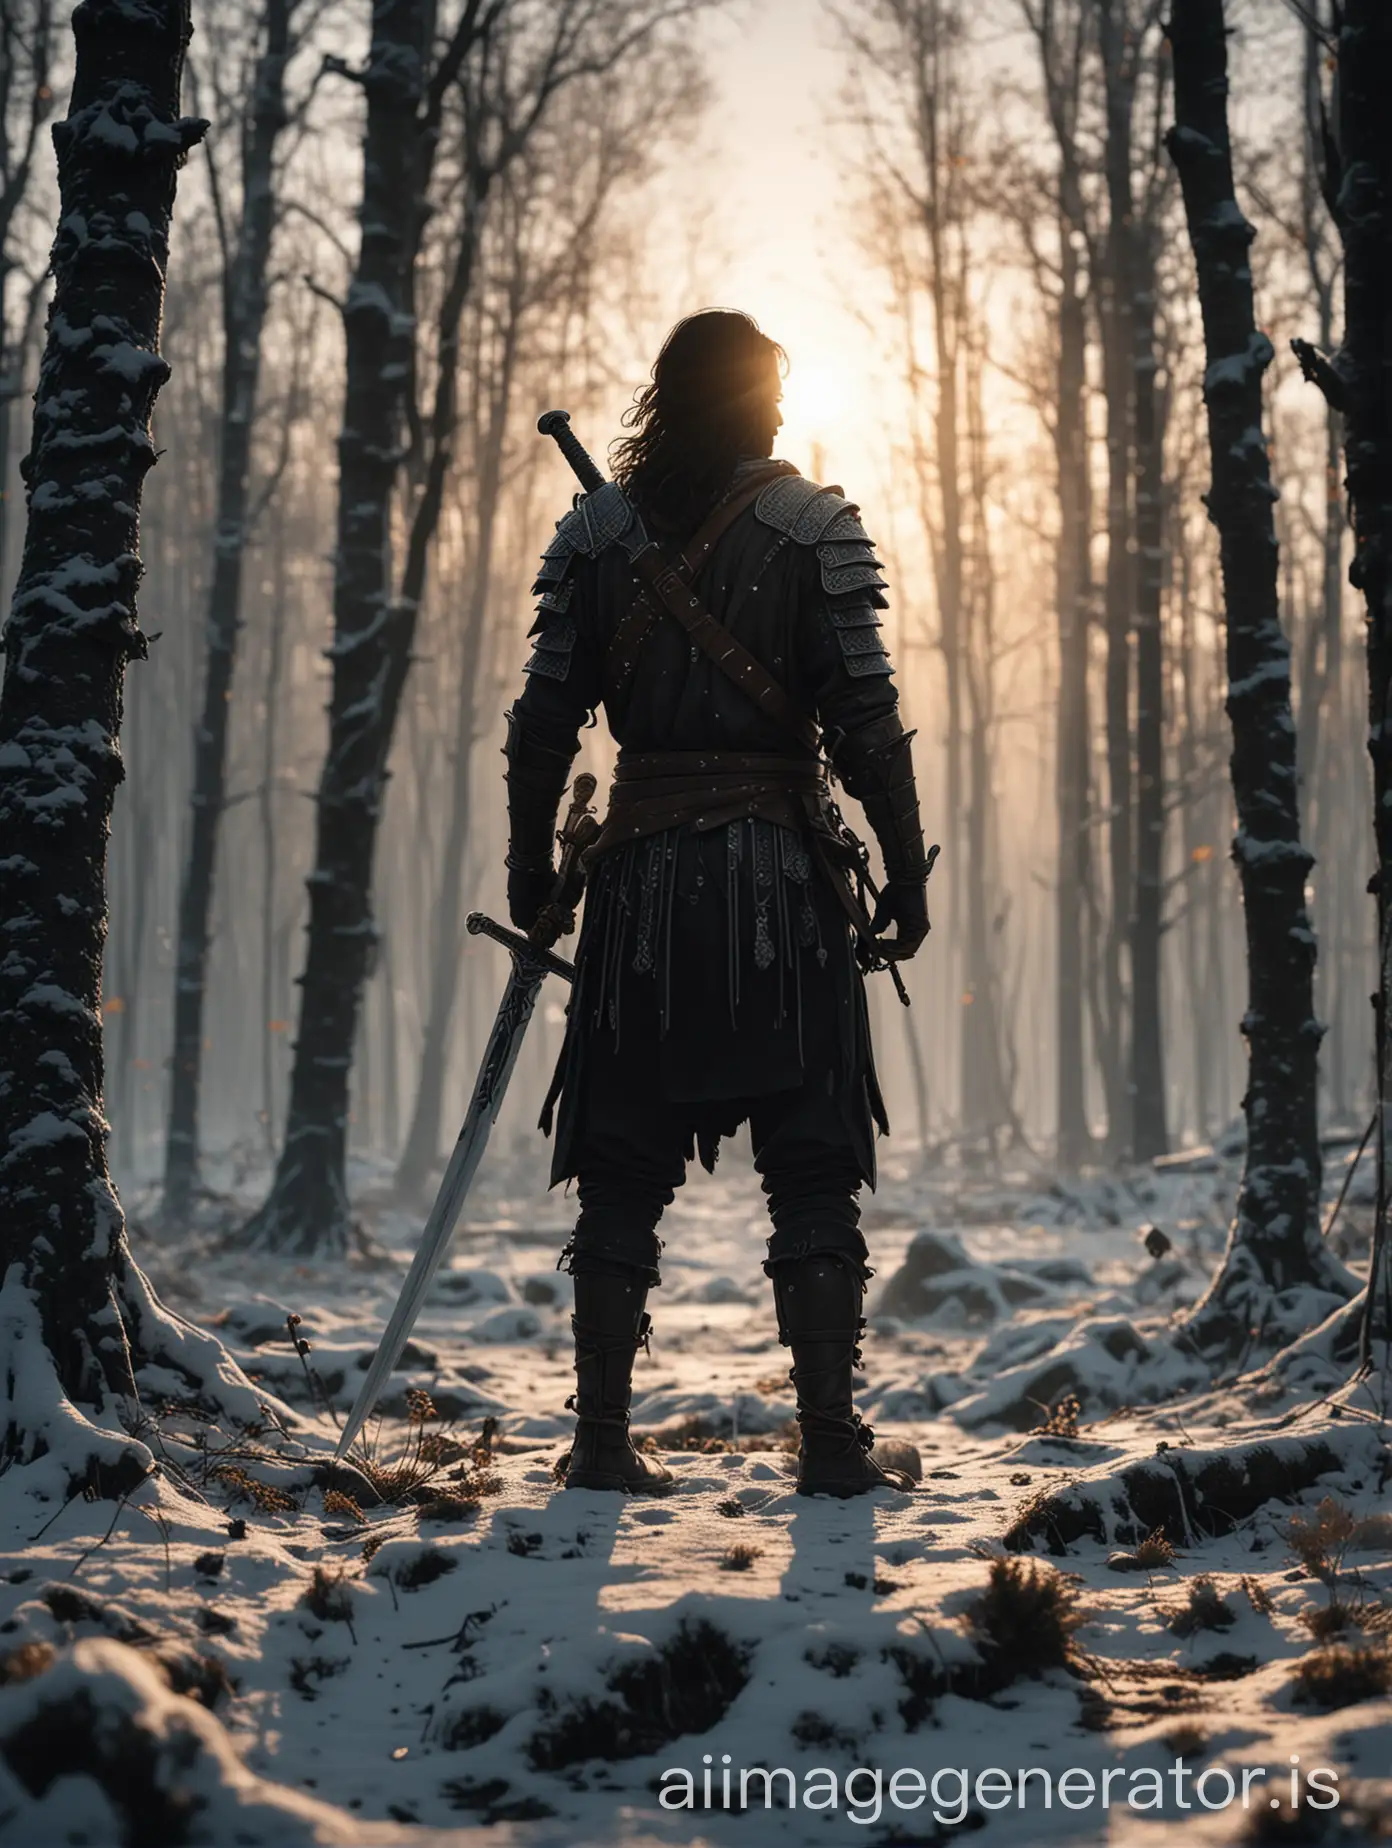 warrior with a sword in the woods, sunset, small figure in the middle, 4k details, winter outside, dark colours, black and. white